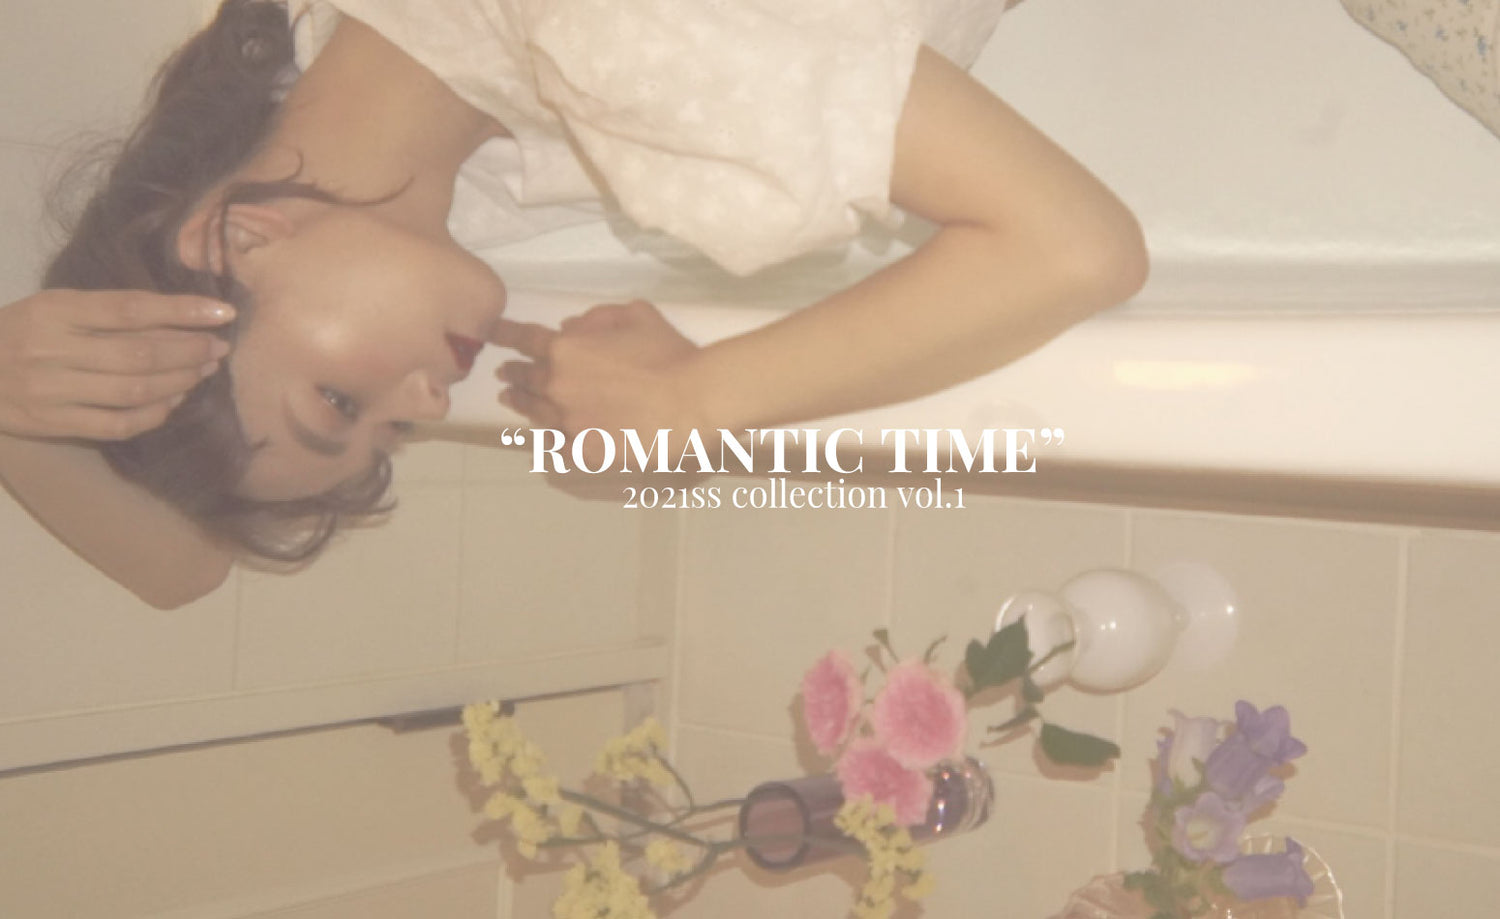 2021ss collection "ROMANTIC TIME..."